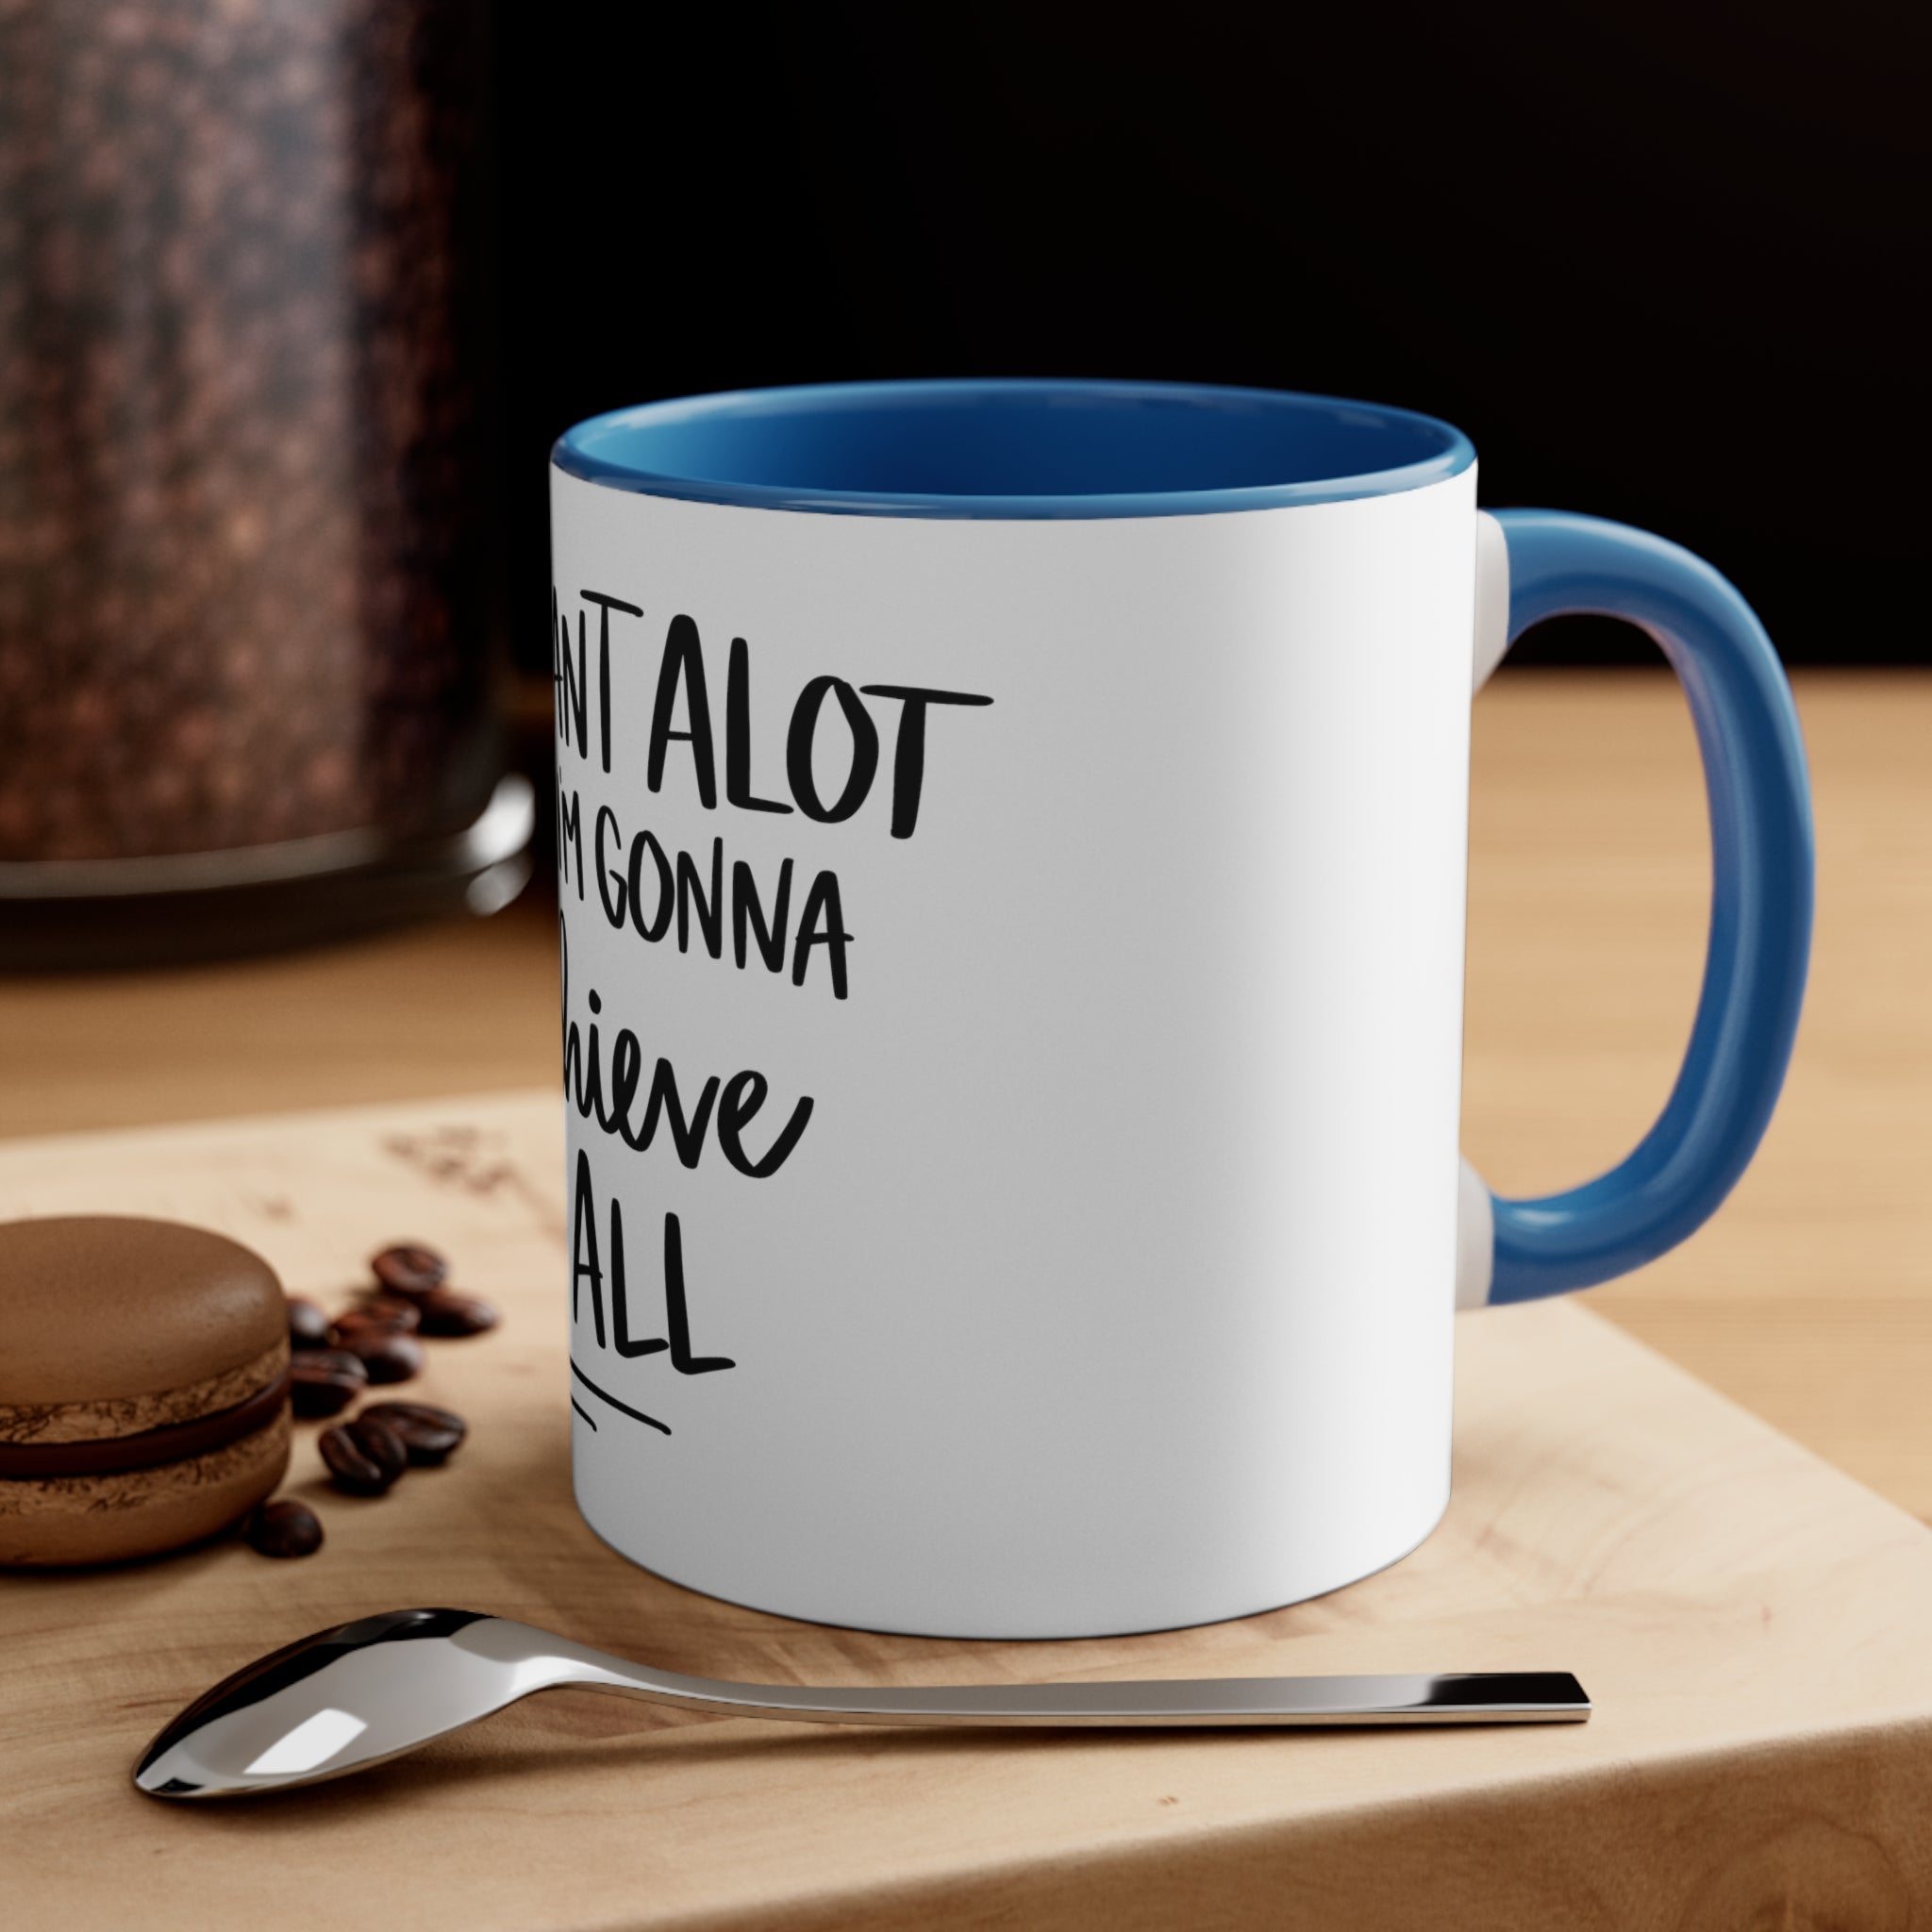 I Want A Lot And I'm Gonna Achieve It All Accent Coffee Mug, 11oz